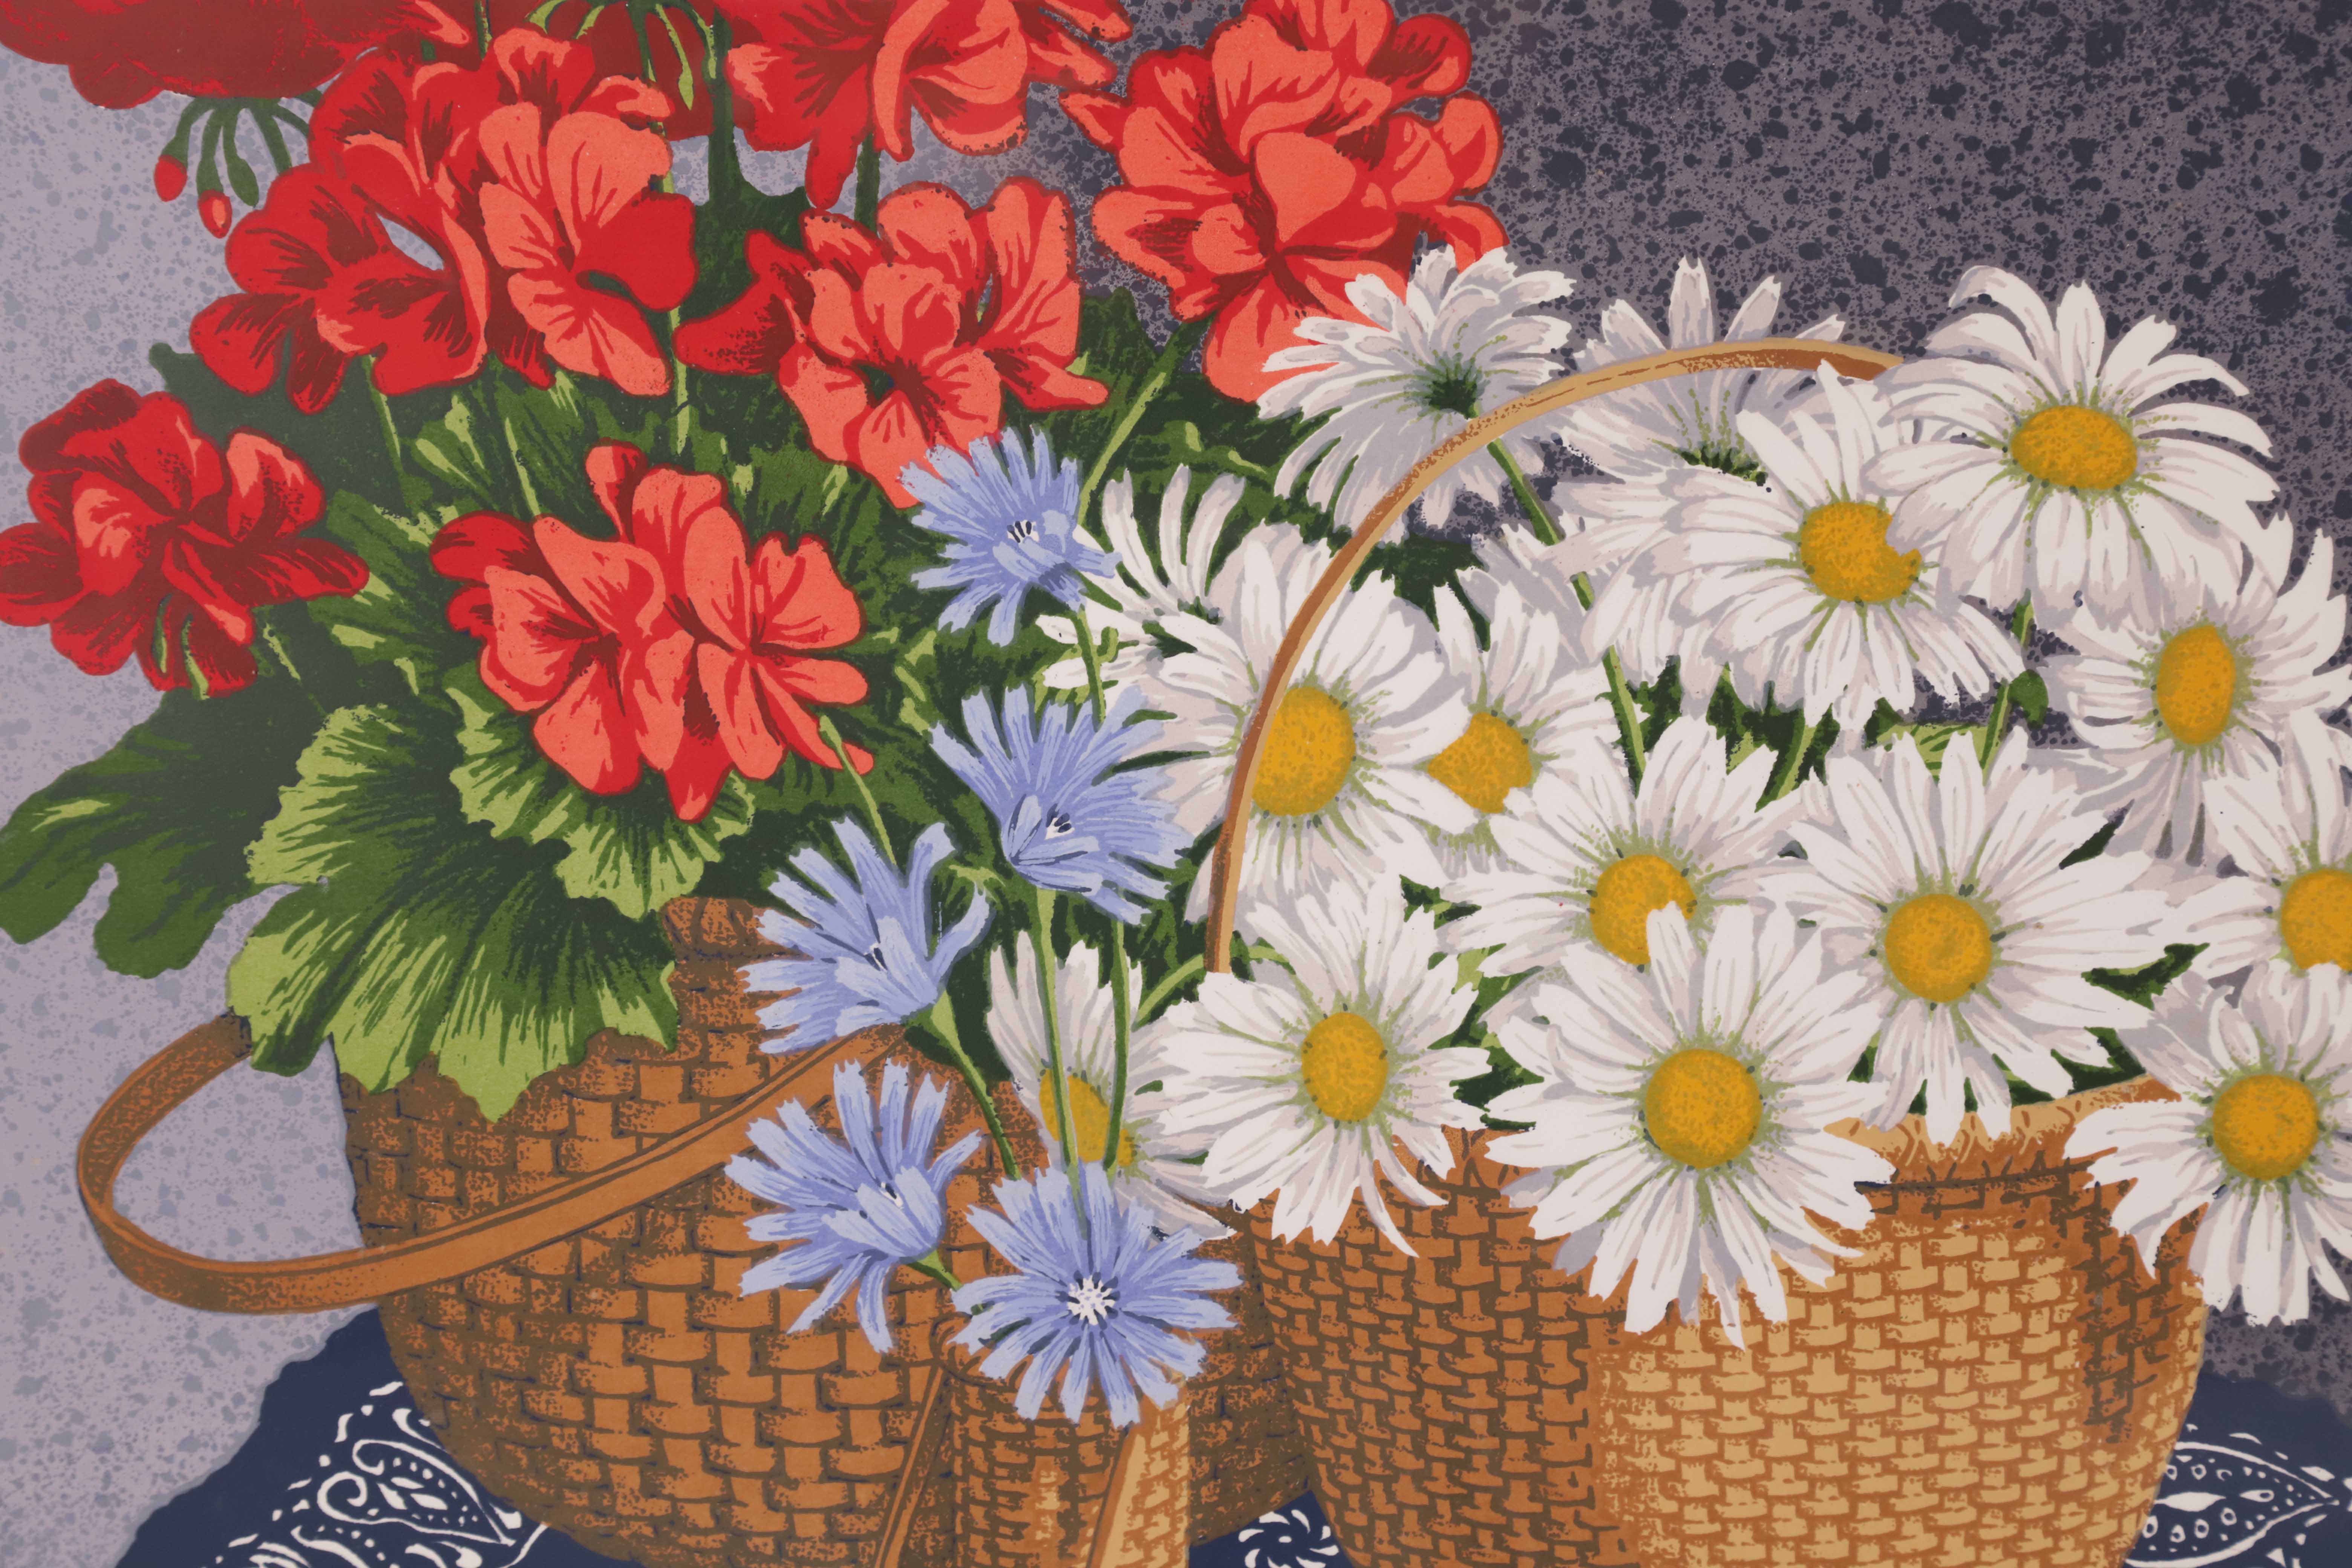 Donn Russell Limited Edition Print “Daisies, Geraniums, and Cornflowers in Nantucket Baskets”